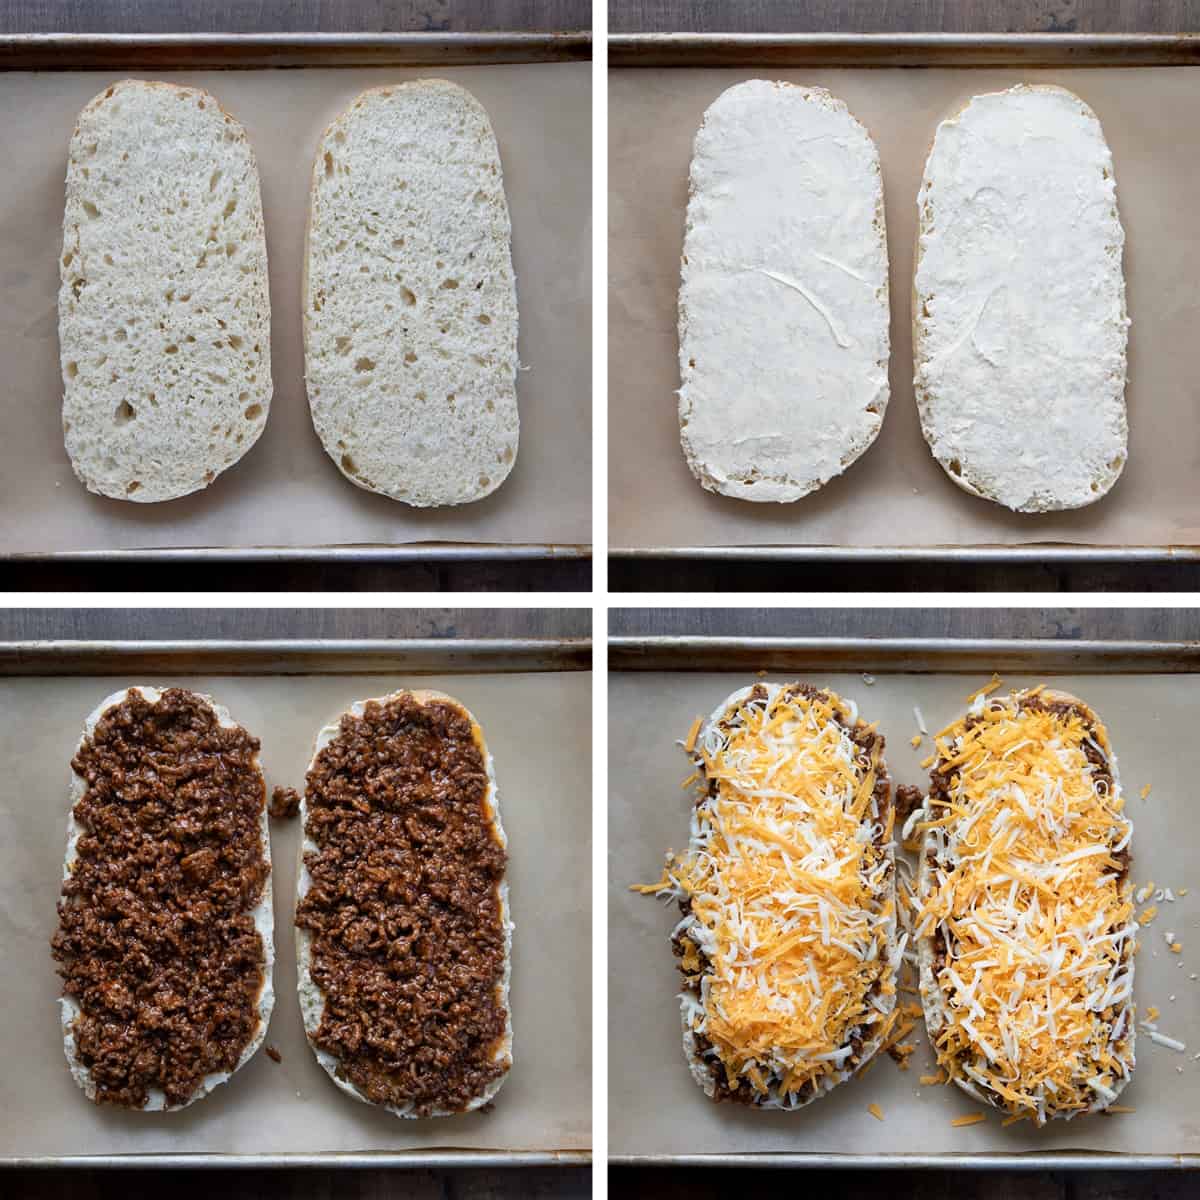 Steps for Making Garlic Bread then Adding Sloppy Joe Mix and Cheese.